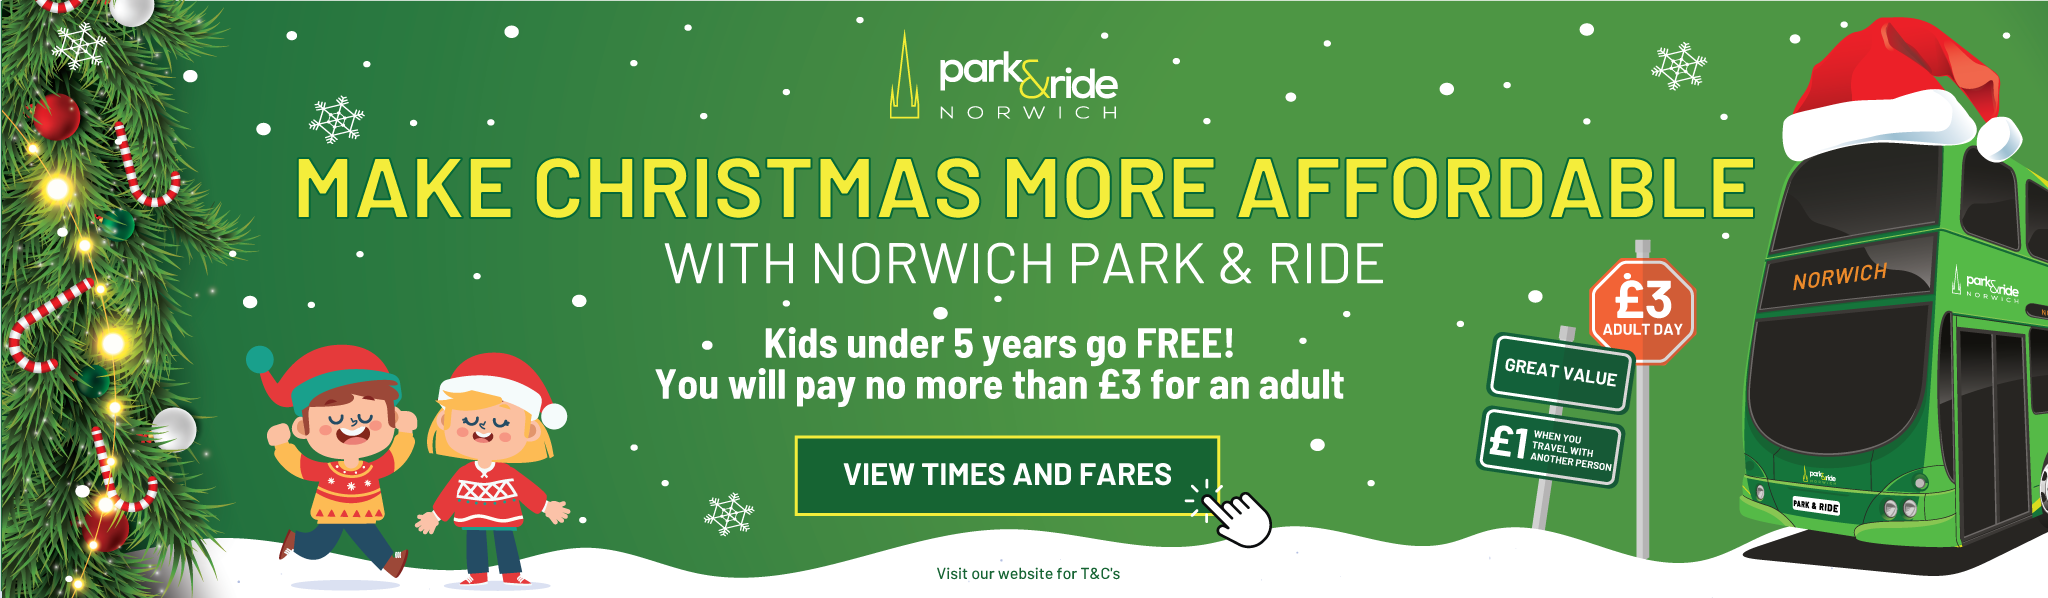 Make Christmas affordable with Norwich Park and Ride 